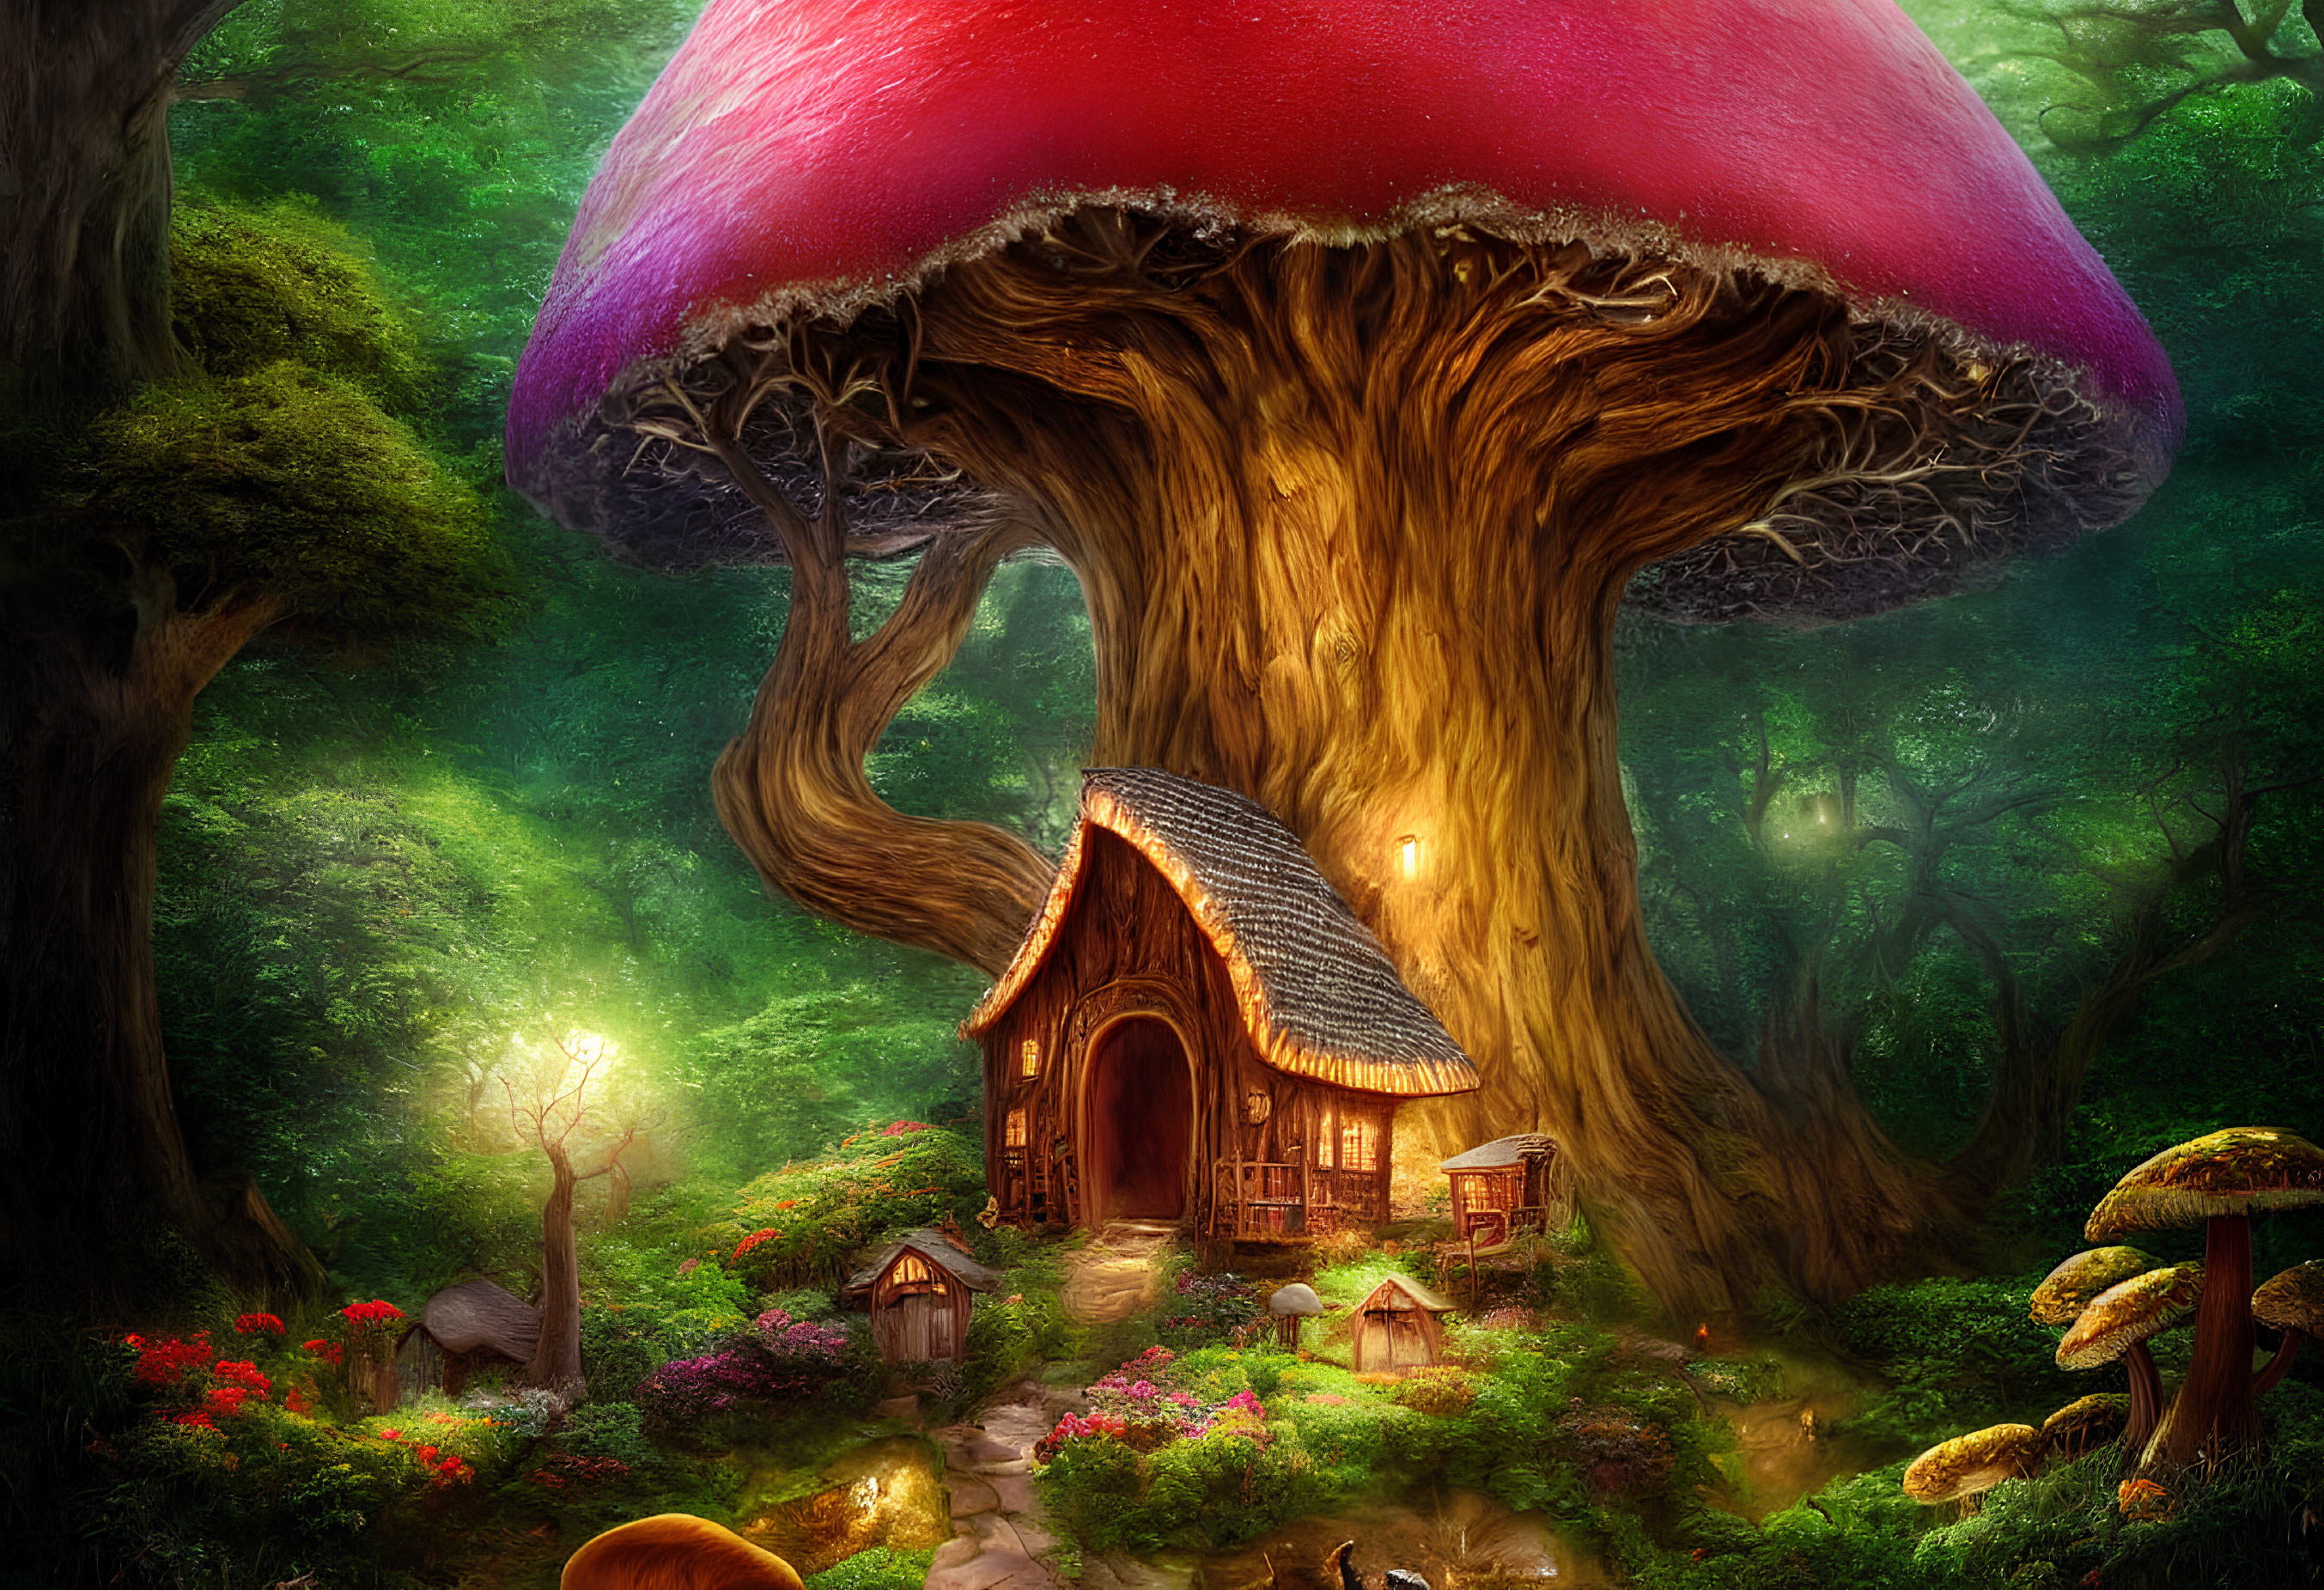 Whimsical illustration of cozy mushroom house in enchanted forest